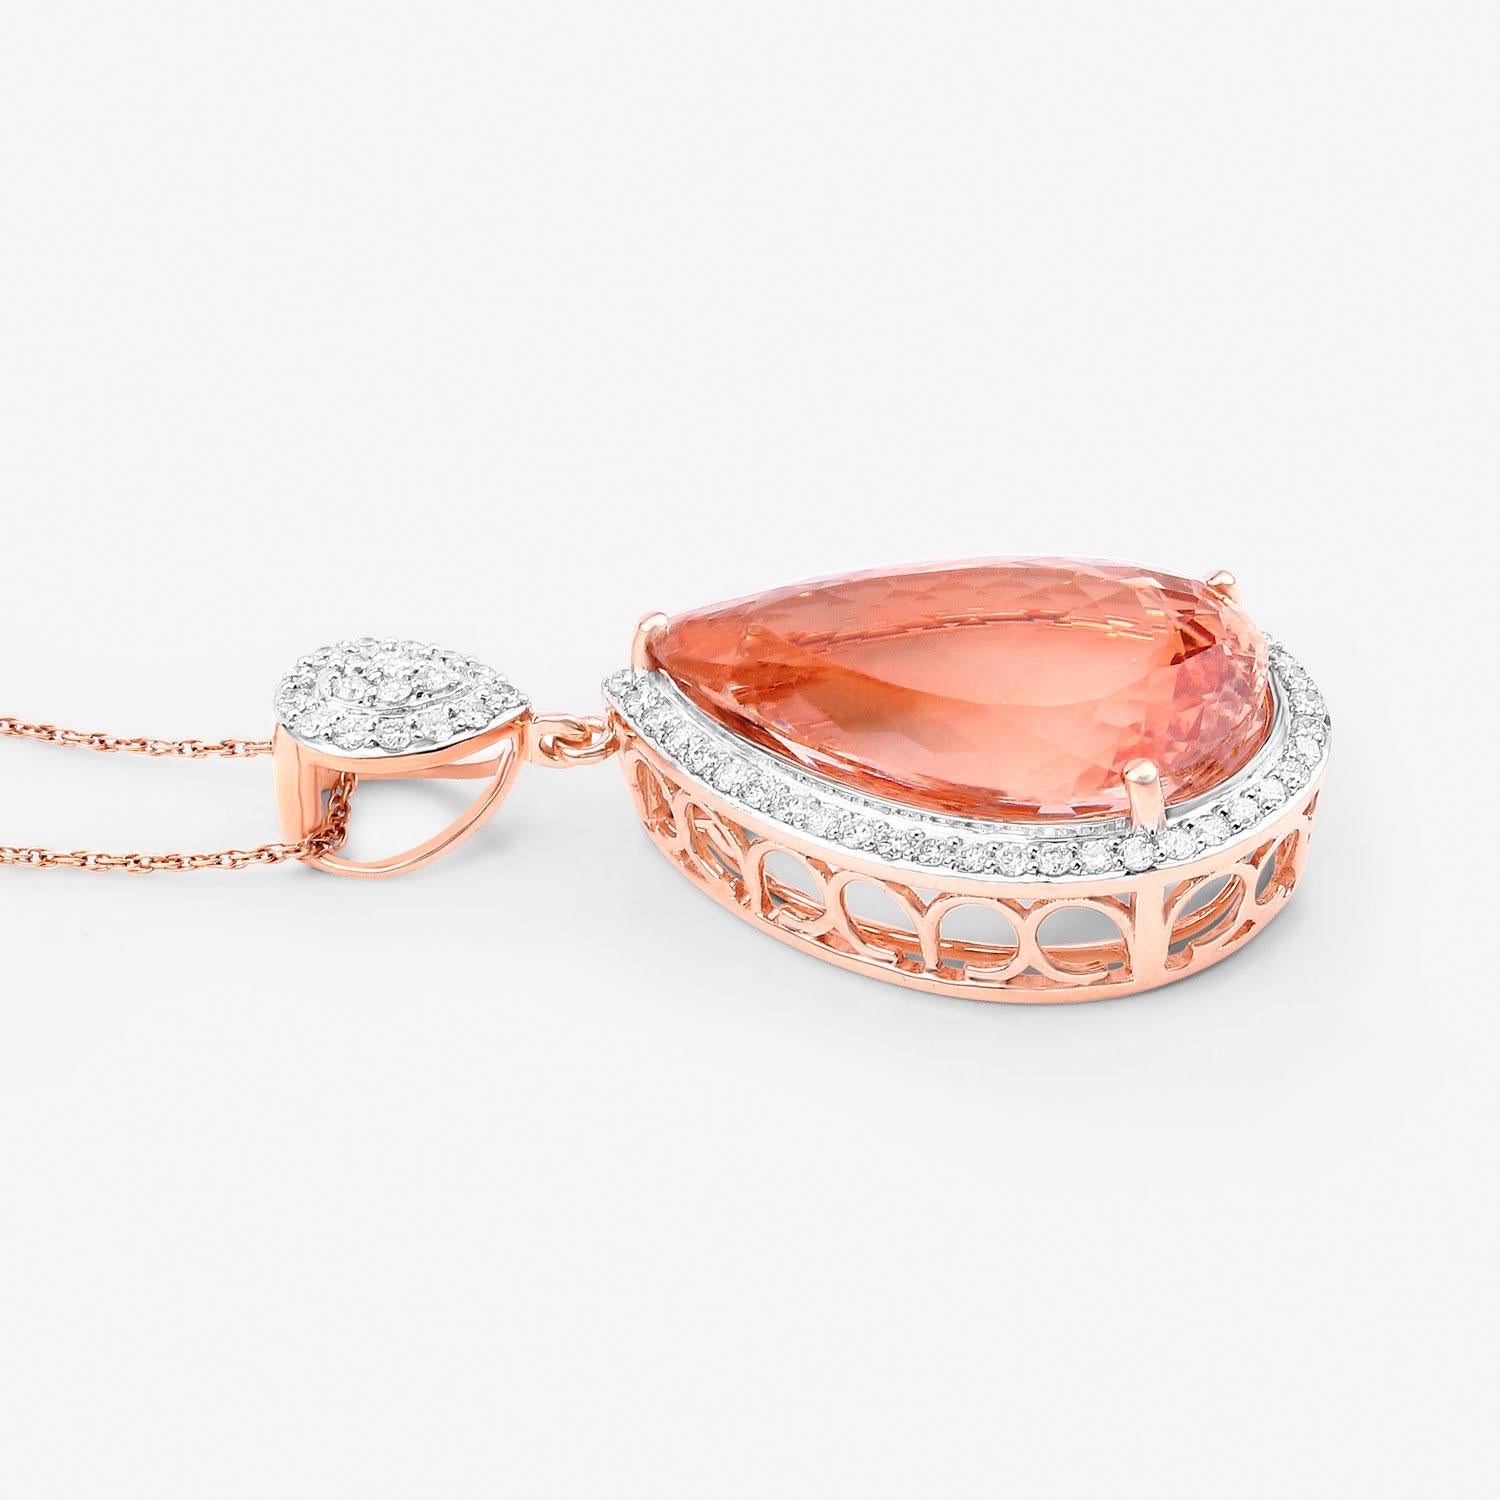 Morganite Necklace With Diamond Halo 13.27 Carats 14K Rose Gold In Excellent Condition For Sale In Laguna Niguel, CA